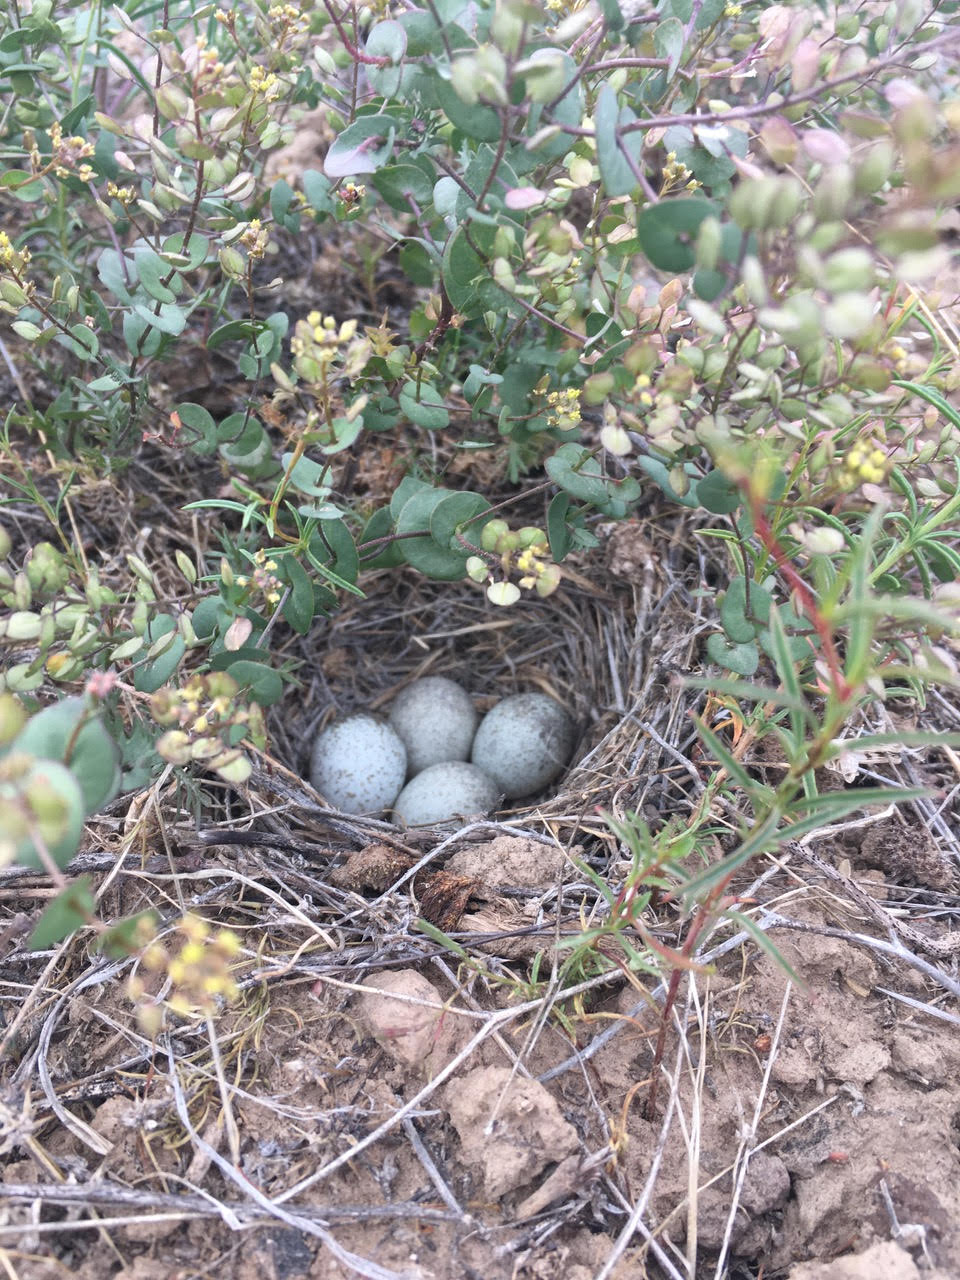 four small speckled eggs are visible in a nest cup on the ground. The nest is lined with twigs and grass, and is tucked underneath some overhanging green plants